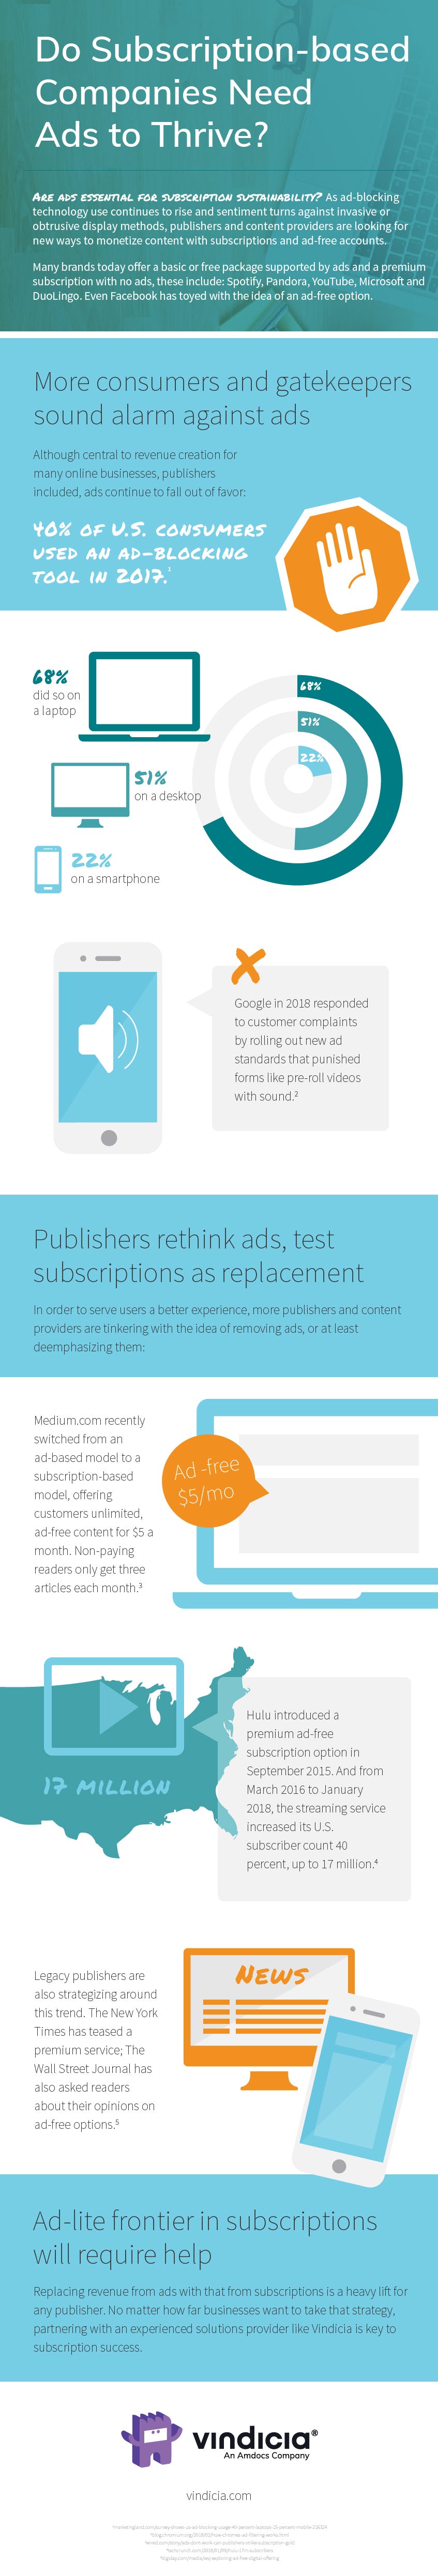 Do Subscription-based comapnies need ads to thrive